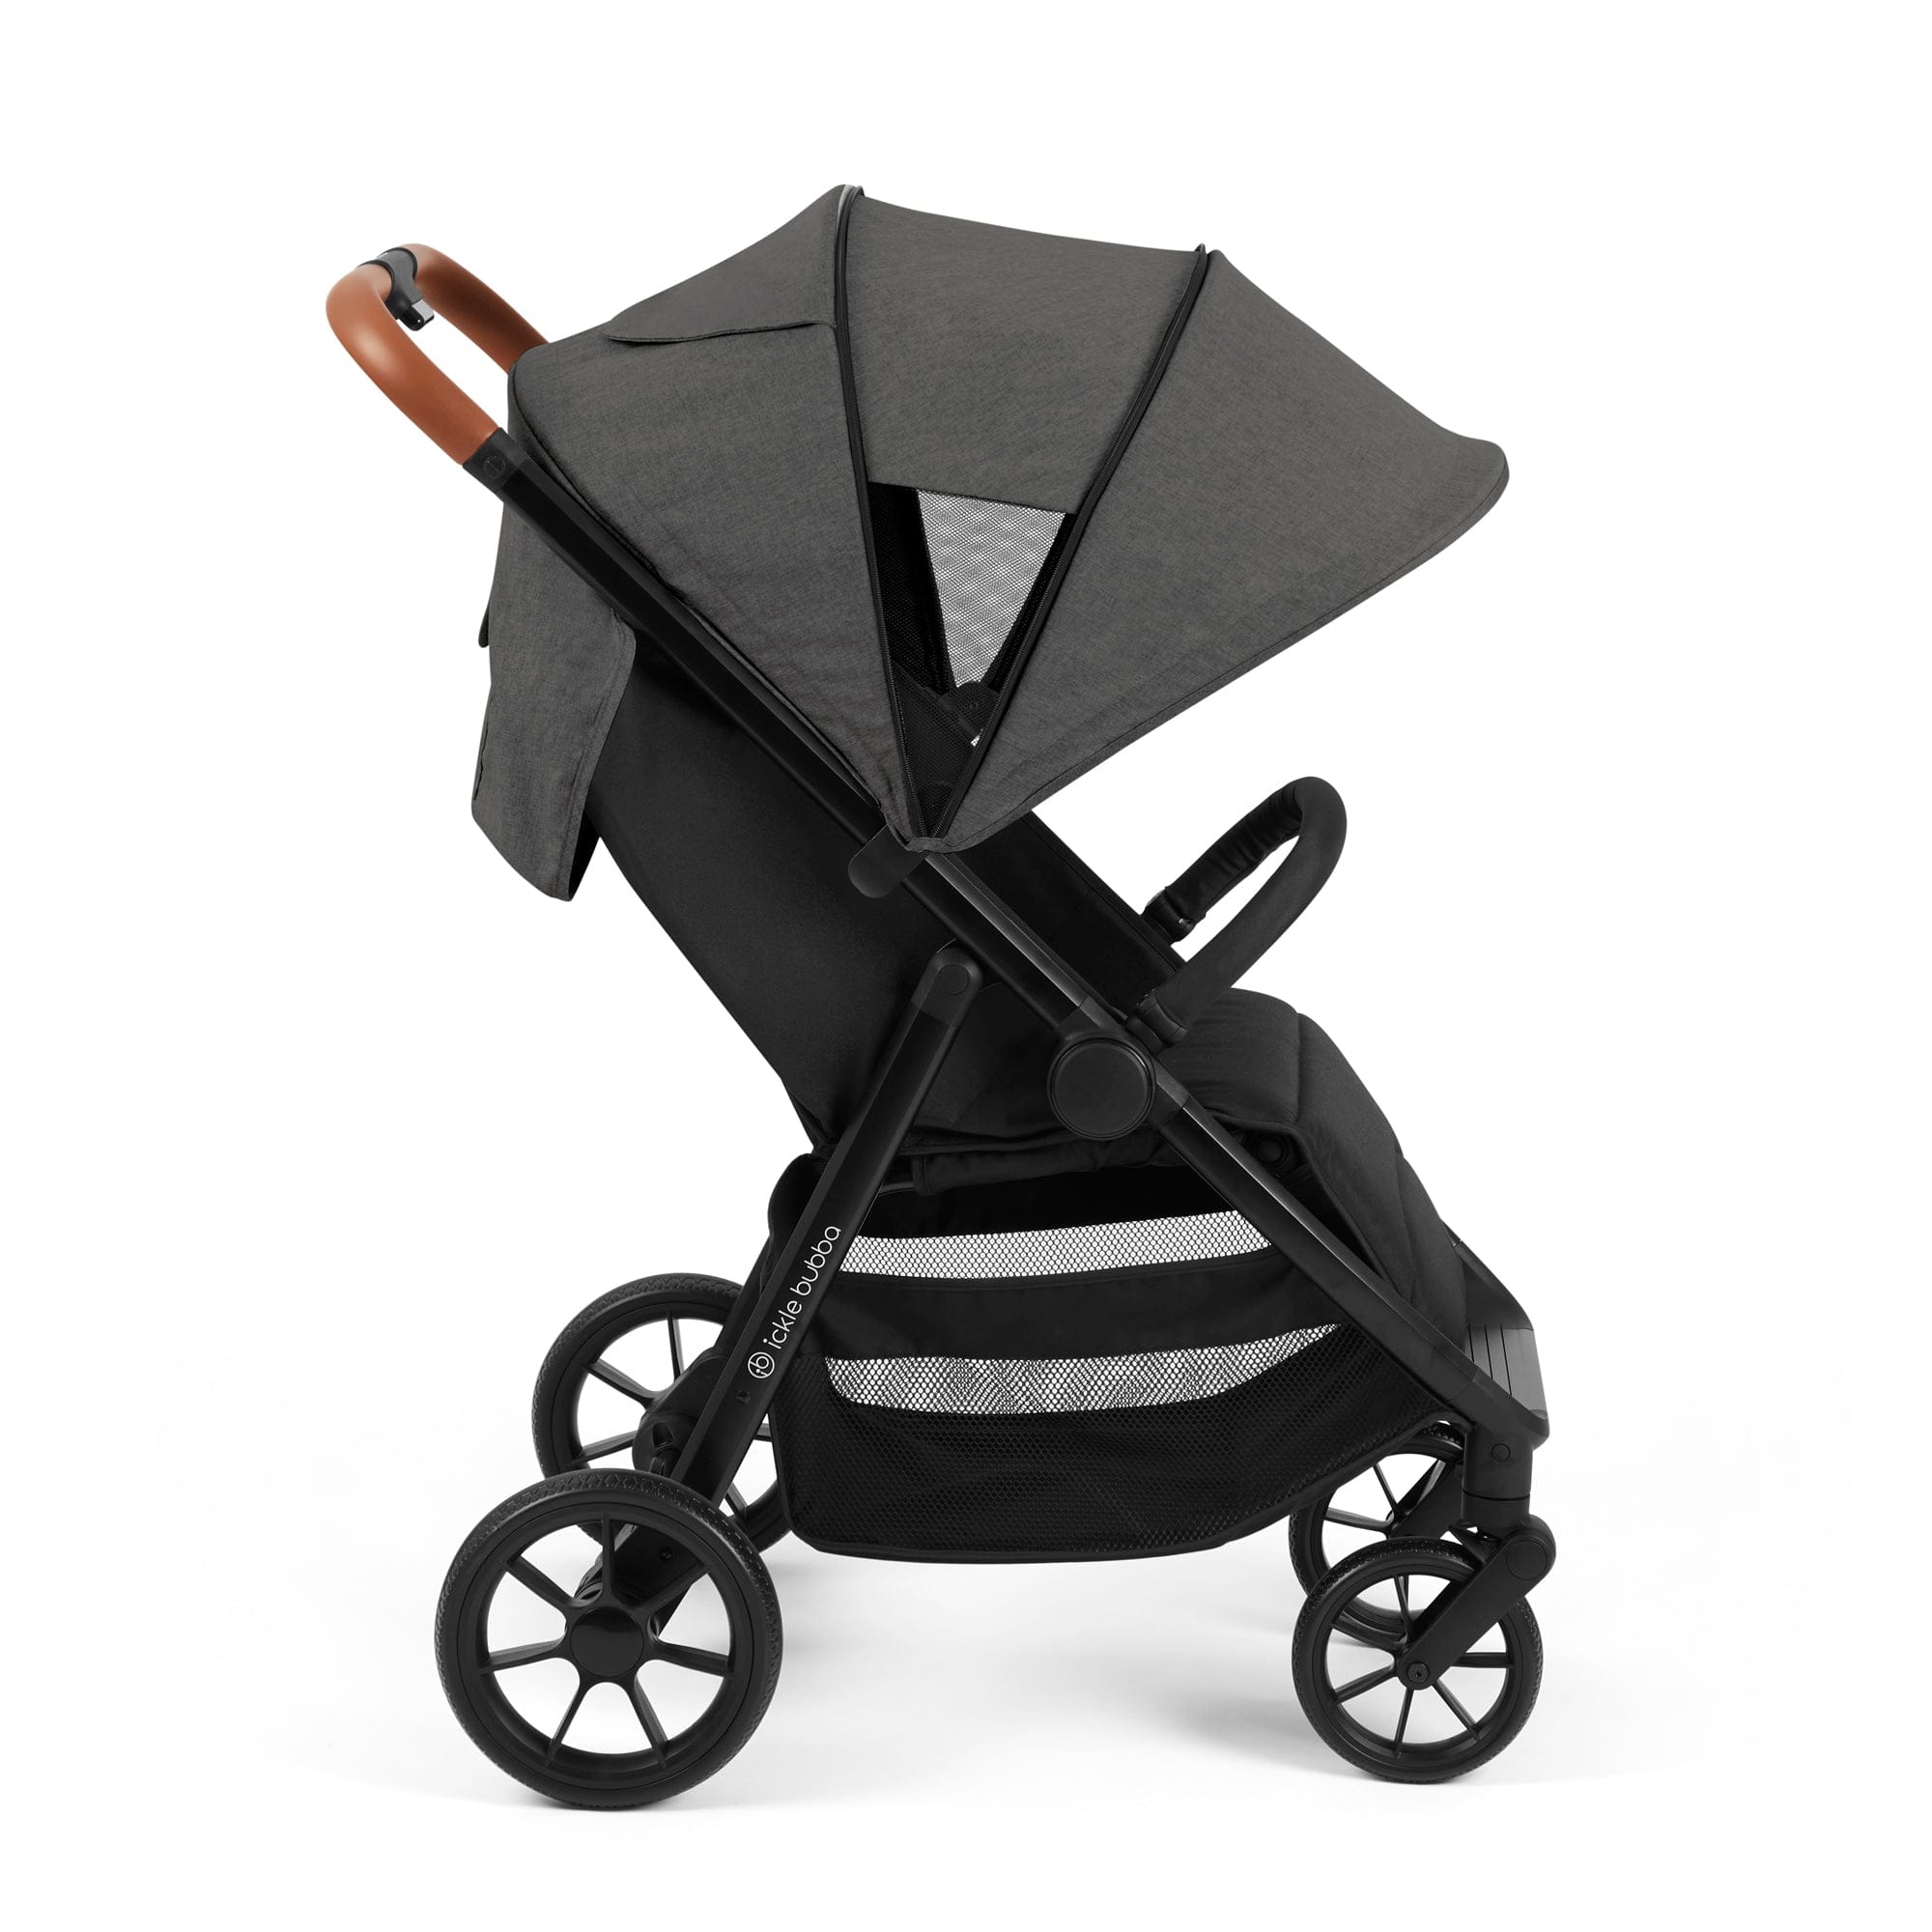 STOMP STRIDE PRIME STROLLER in Charcoal Grey Pushchairs & Buggies 15-006-300-148 5056515033922